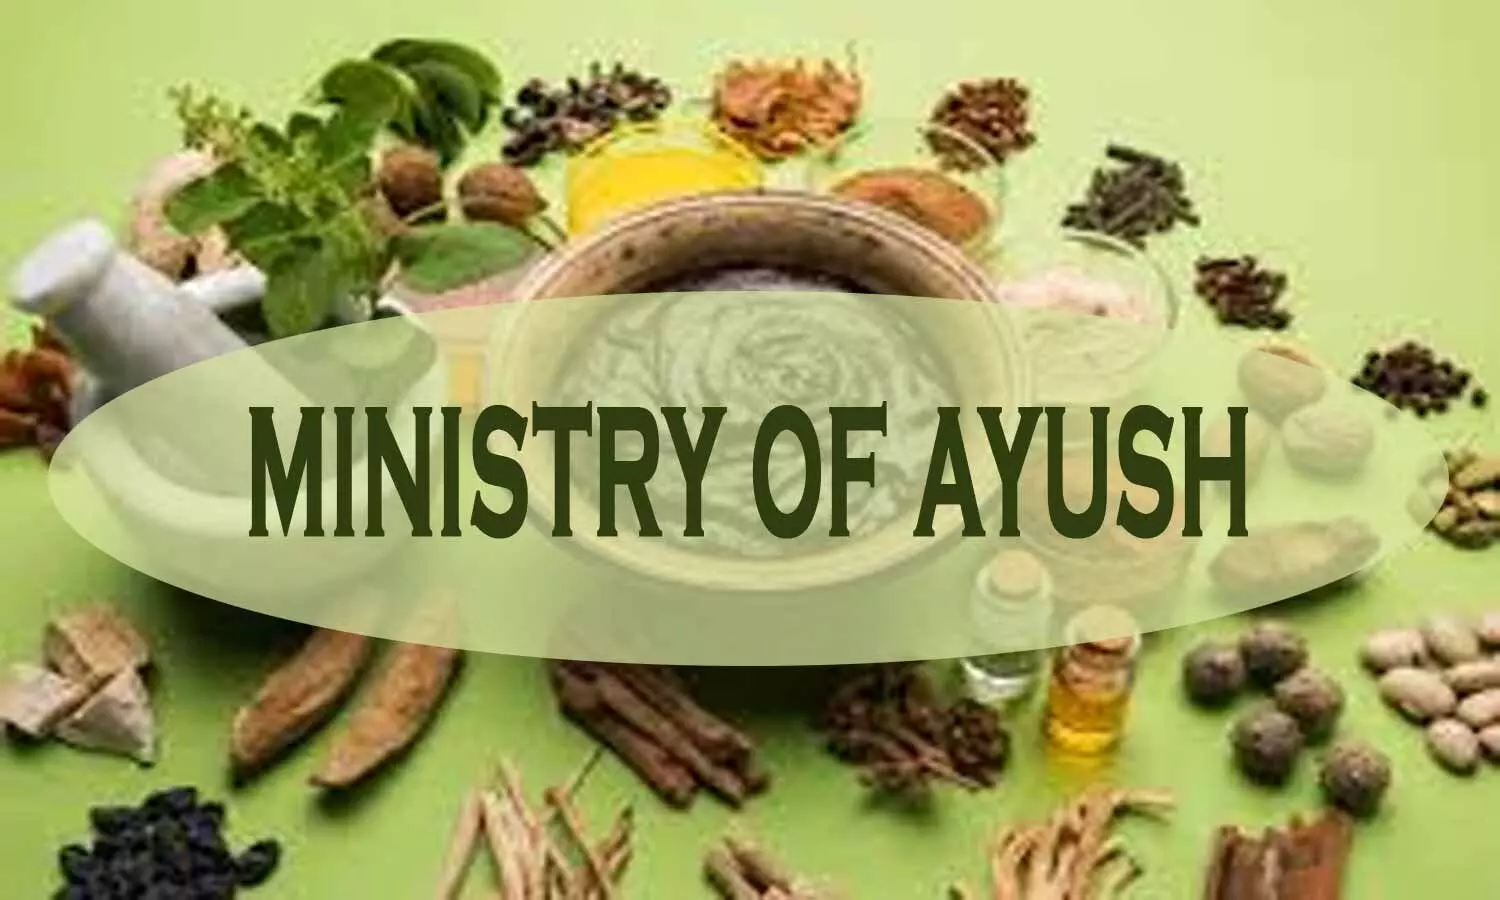 AYUSH Ministry to organize e-marathon to promote physical, mental well-being amid COVID-19